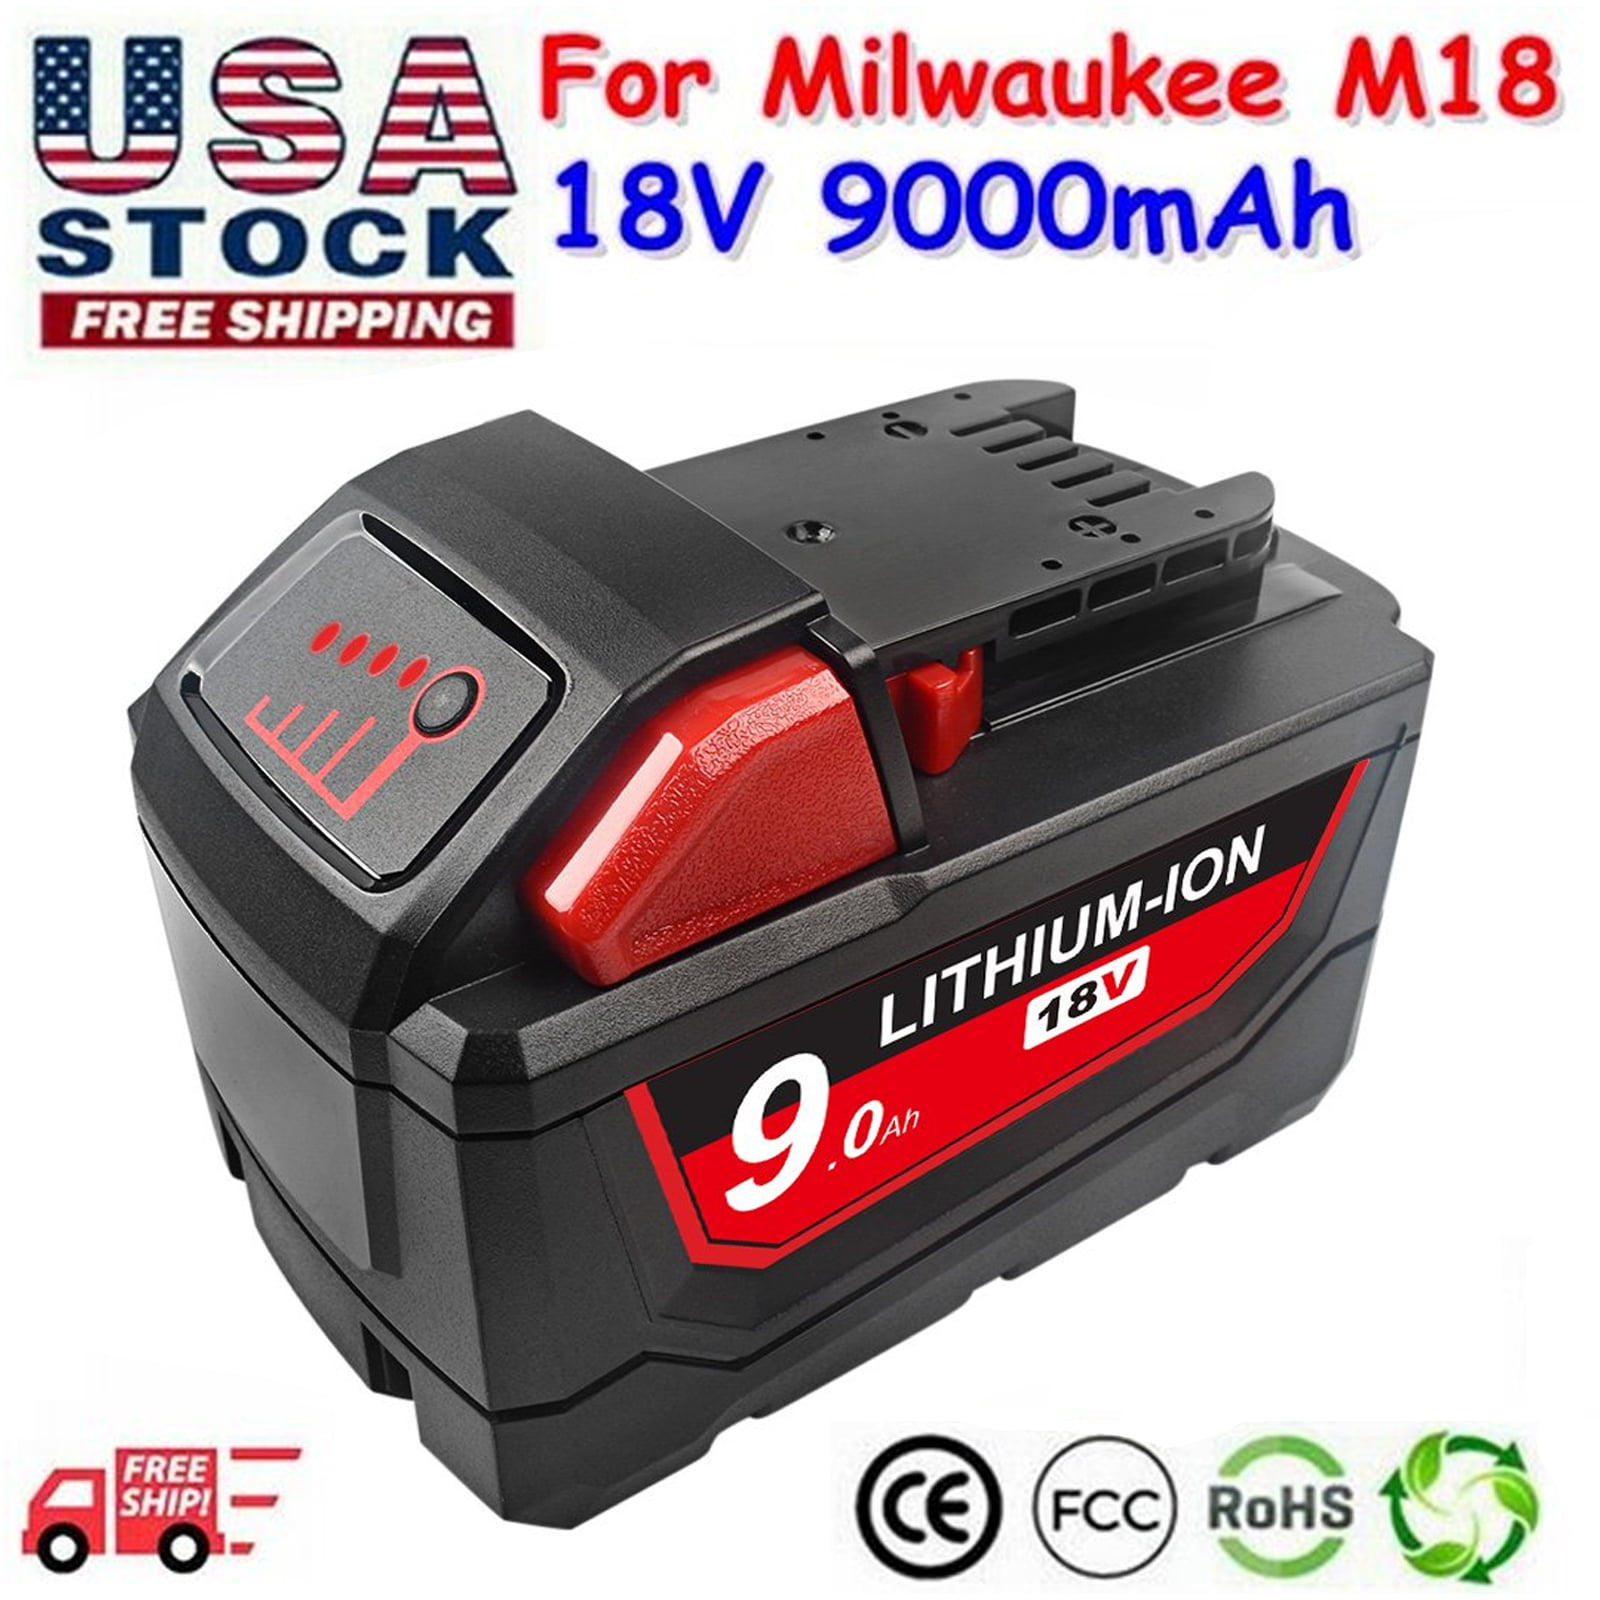 9.0-4.0AH Extended Capacity Battery For Milwaukee M18 Lithium XC 48-11-1860 US 